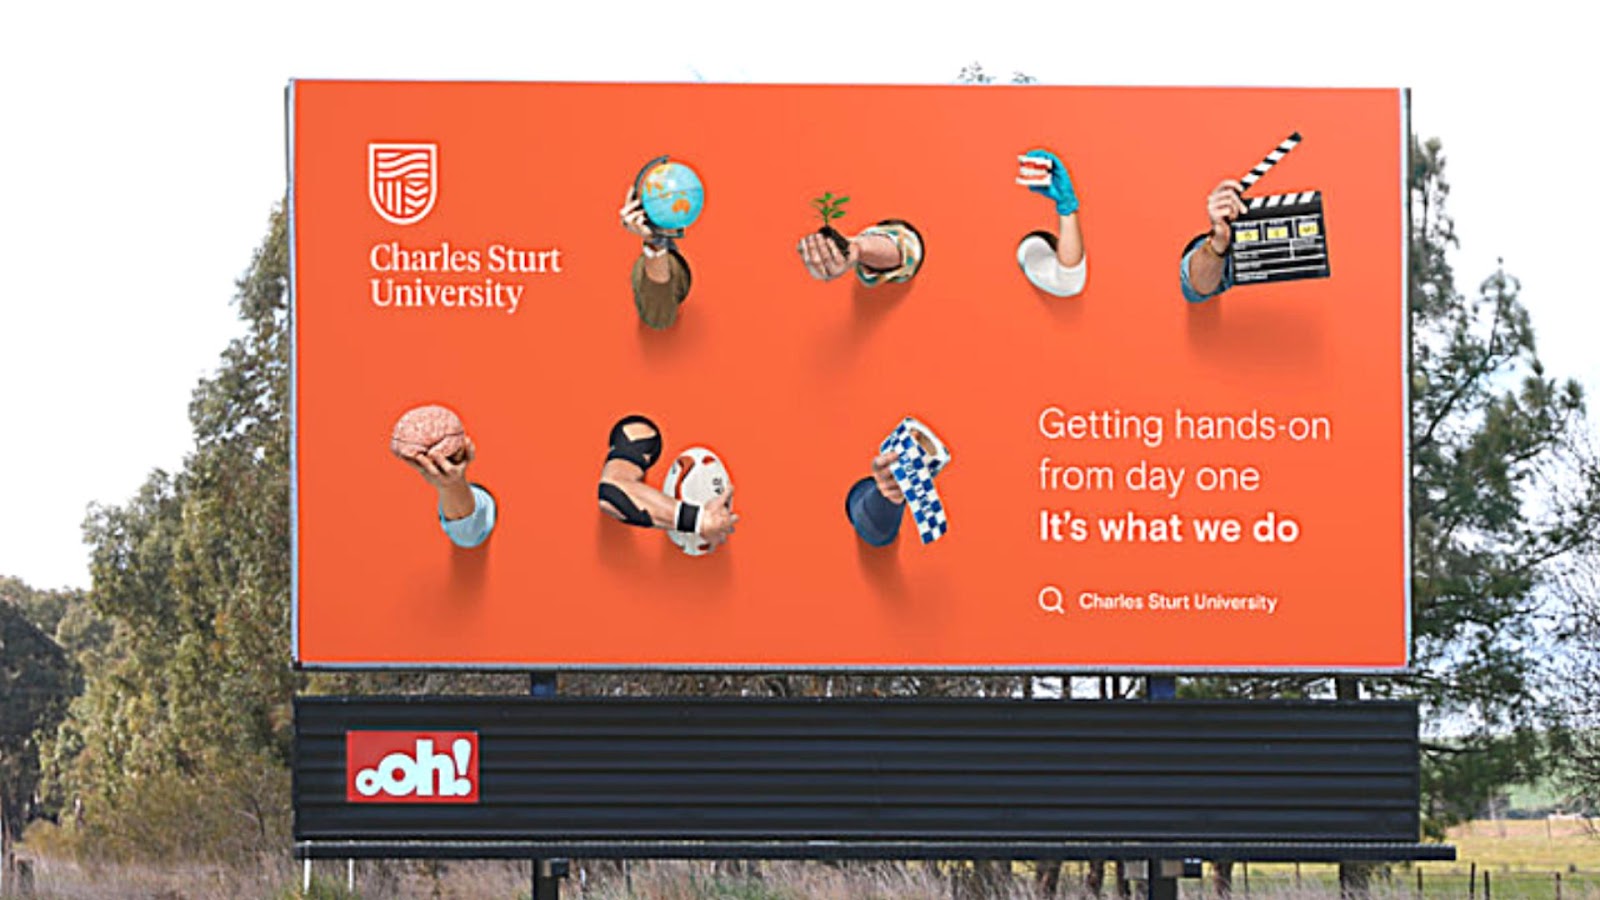 Charles Sturt University's billboard with the text, "Getting hands-on from day one It's what we do"